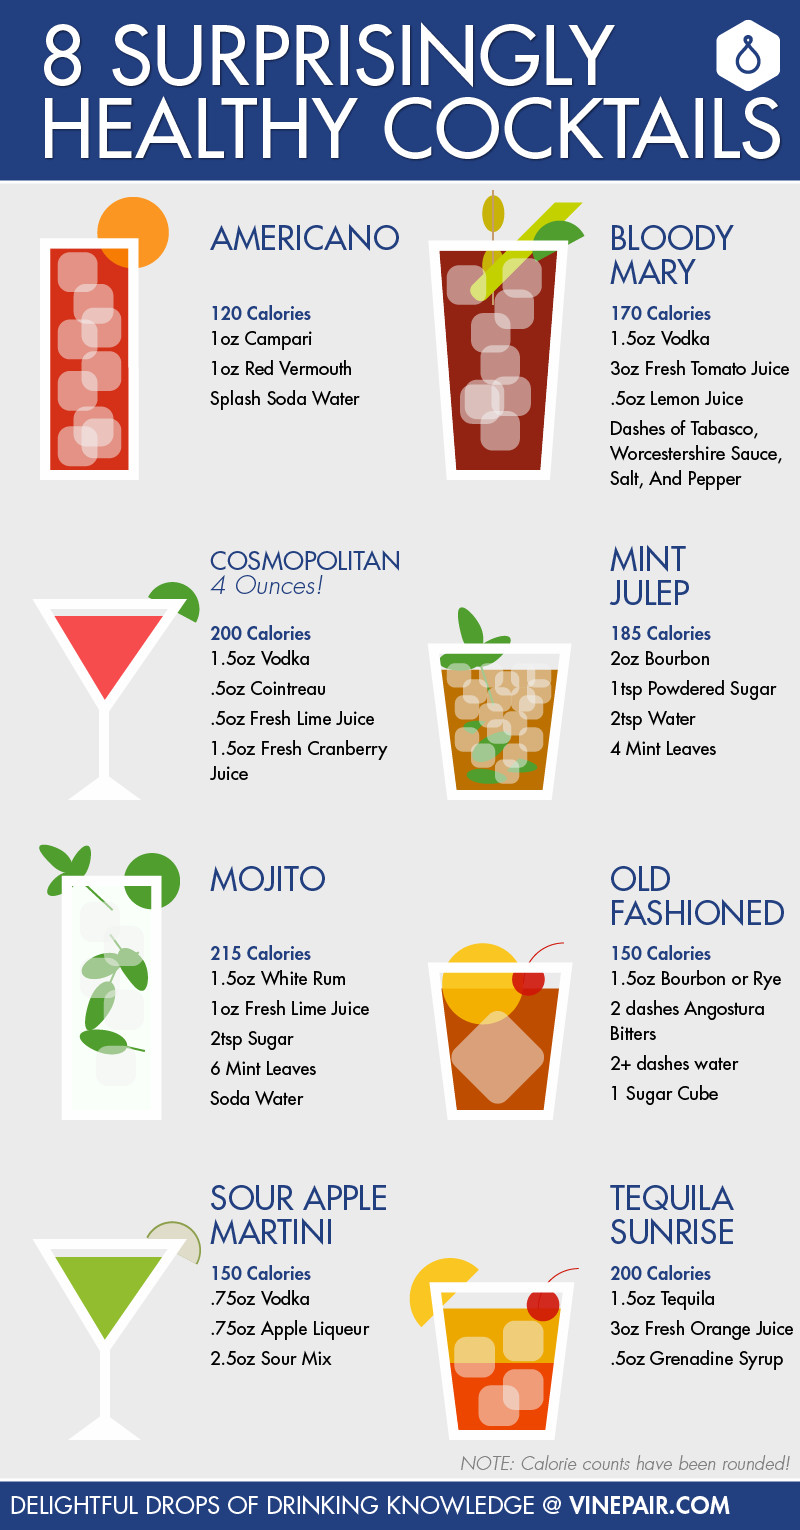 Vodka Drinks Low Calorie
 8 Surprisingly Healthy Cocktail Recipes INFOGRAPHIC